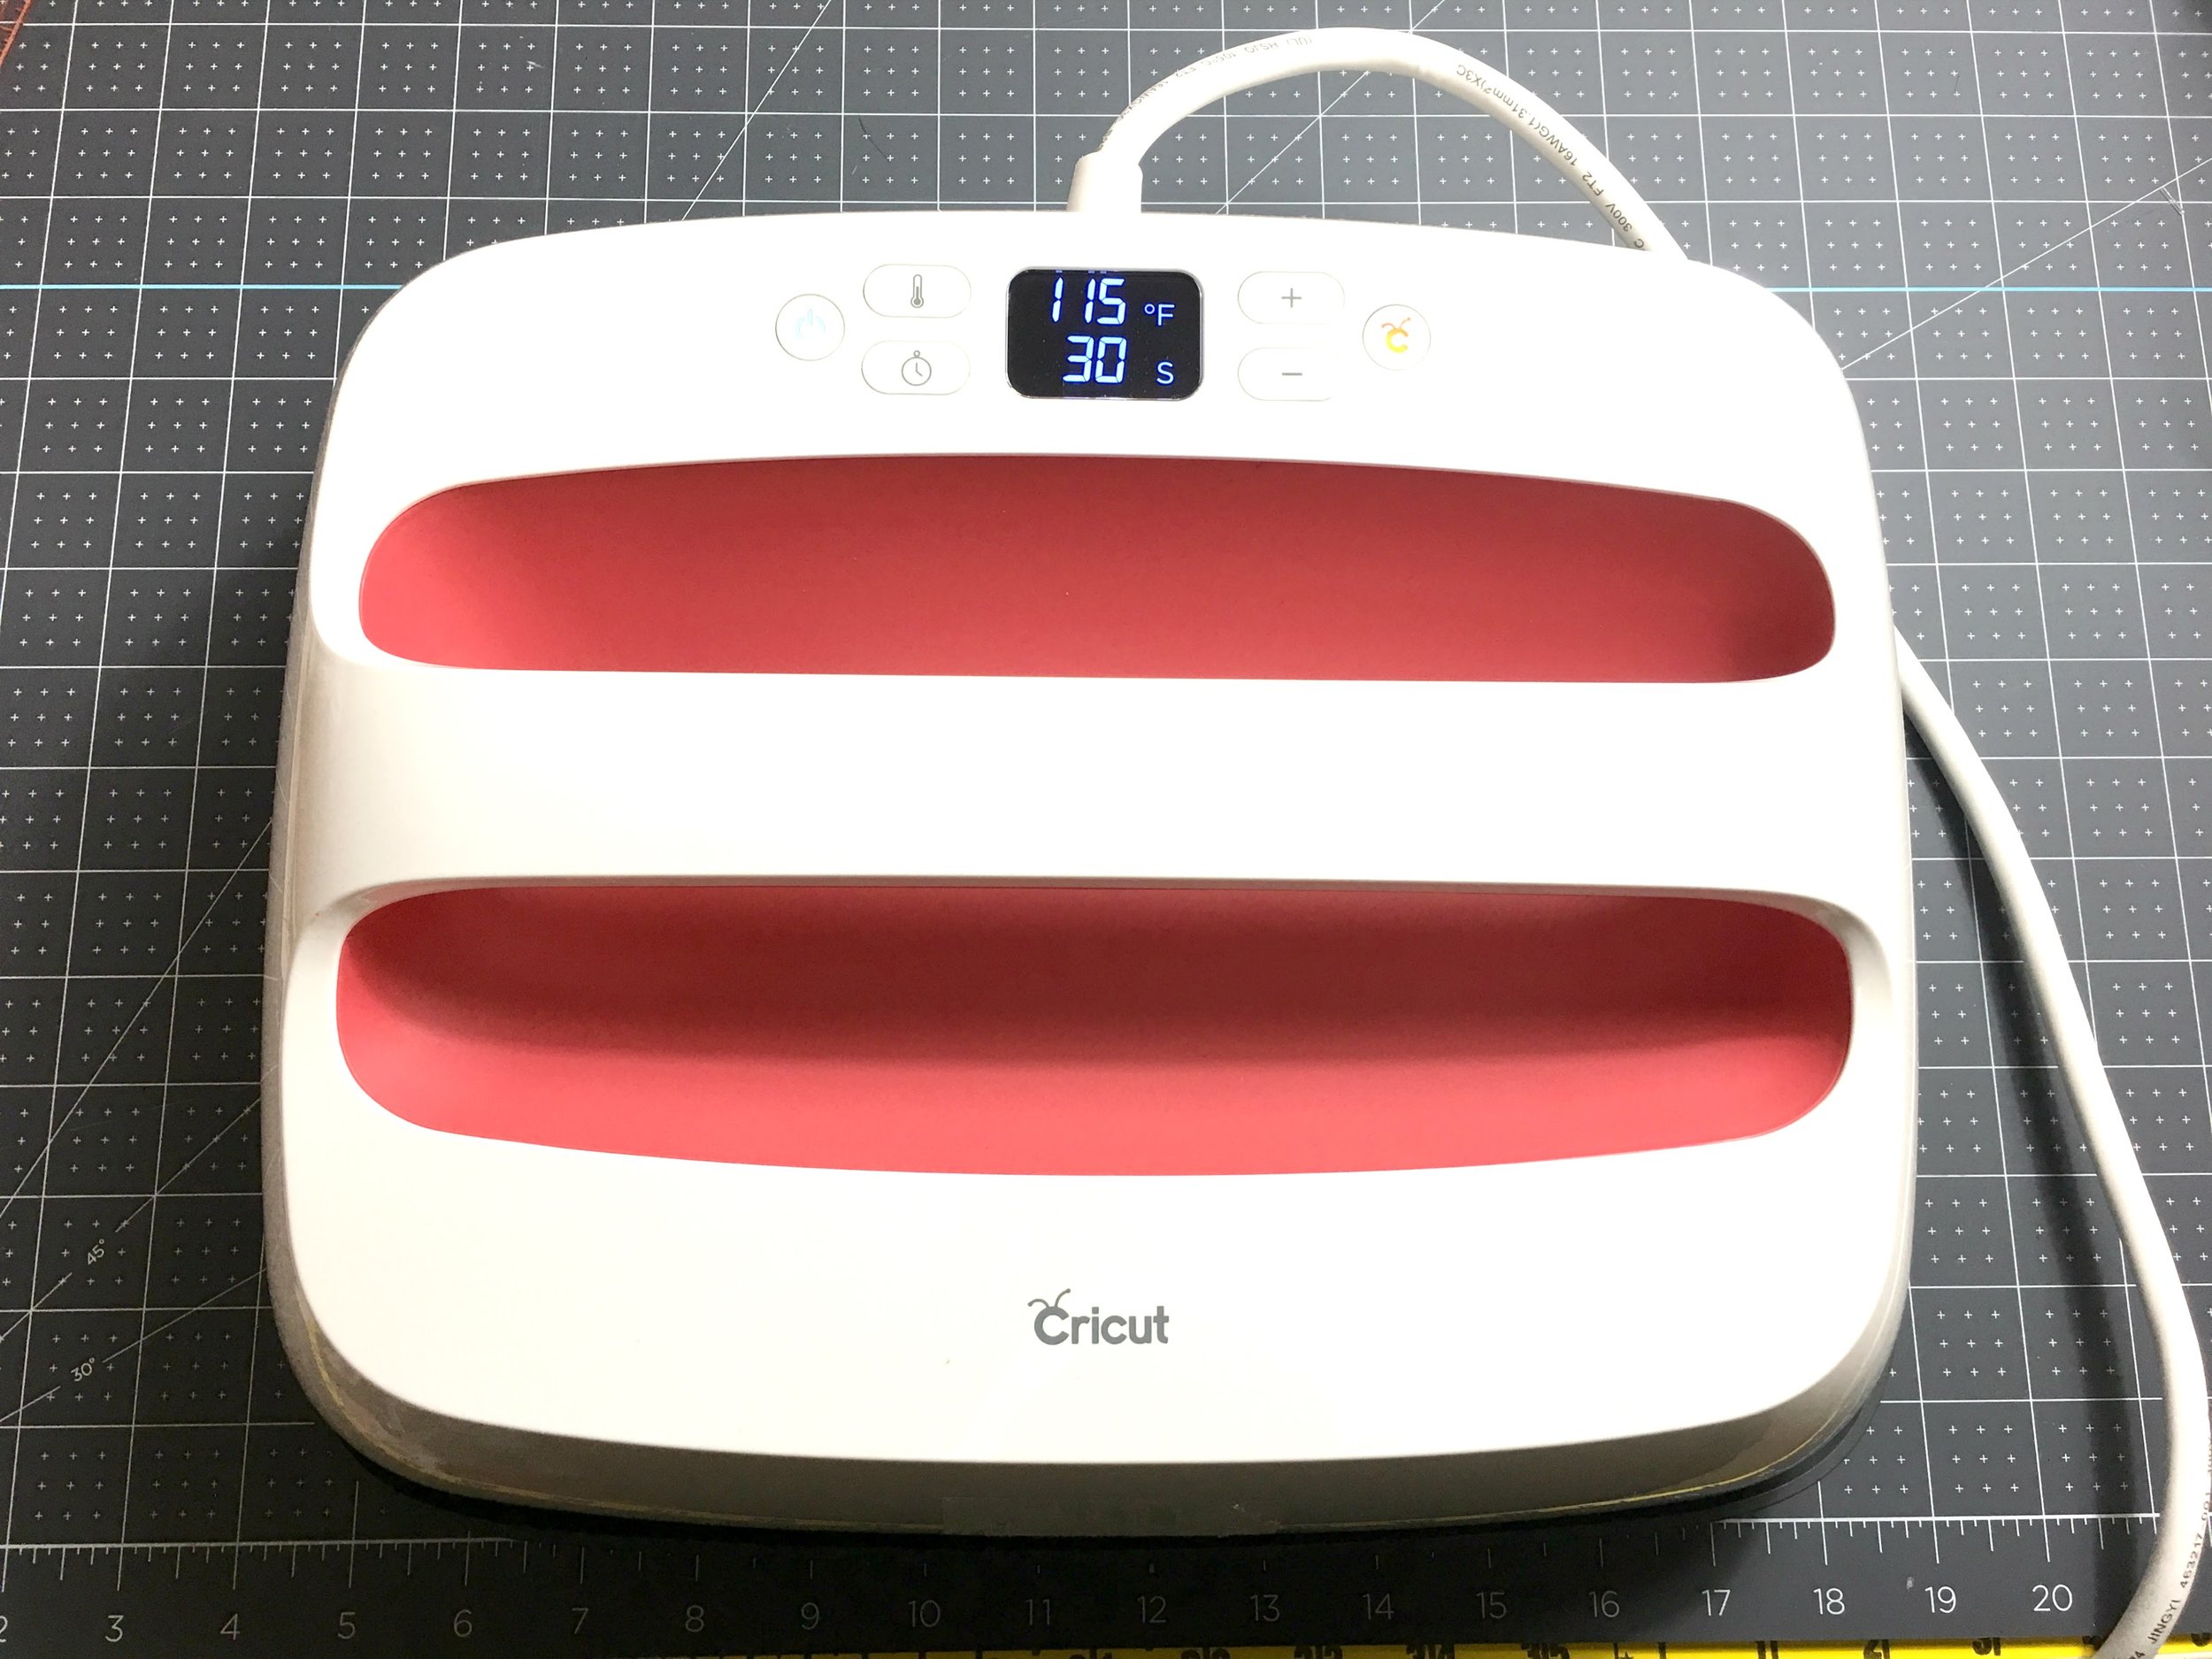 Cricut EasyPress2 versus Singer Steam Press: How do they stack up